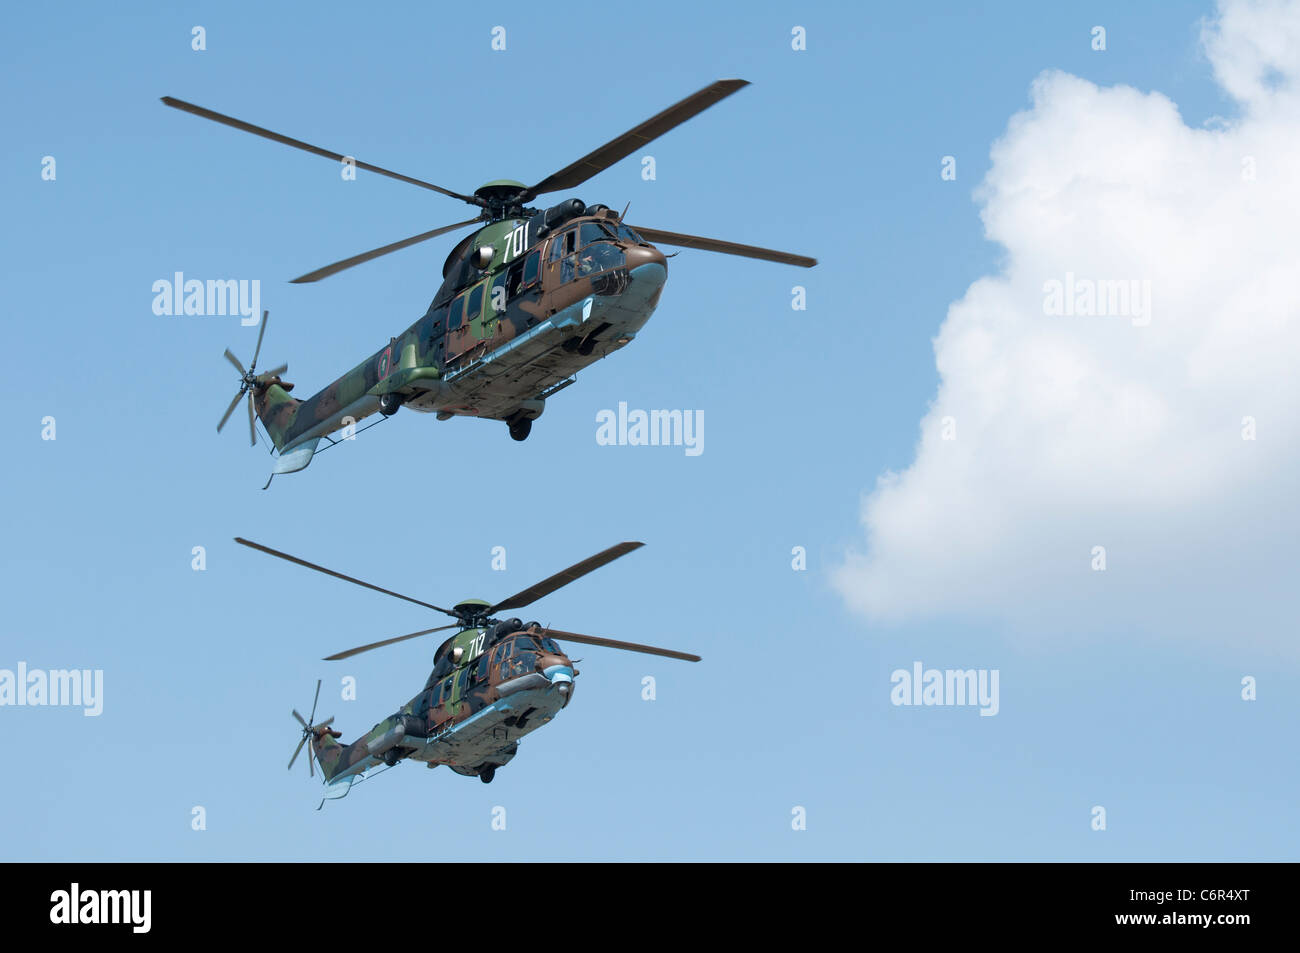 Two green military helicopters on blue sky background Stock Photo